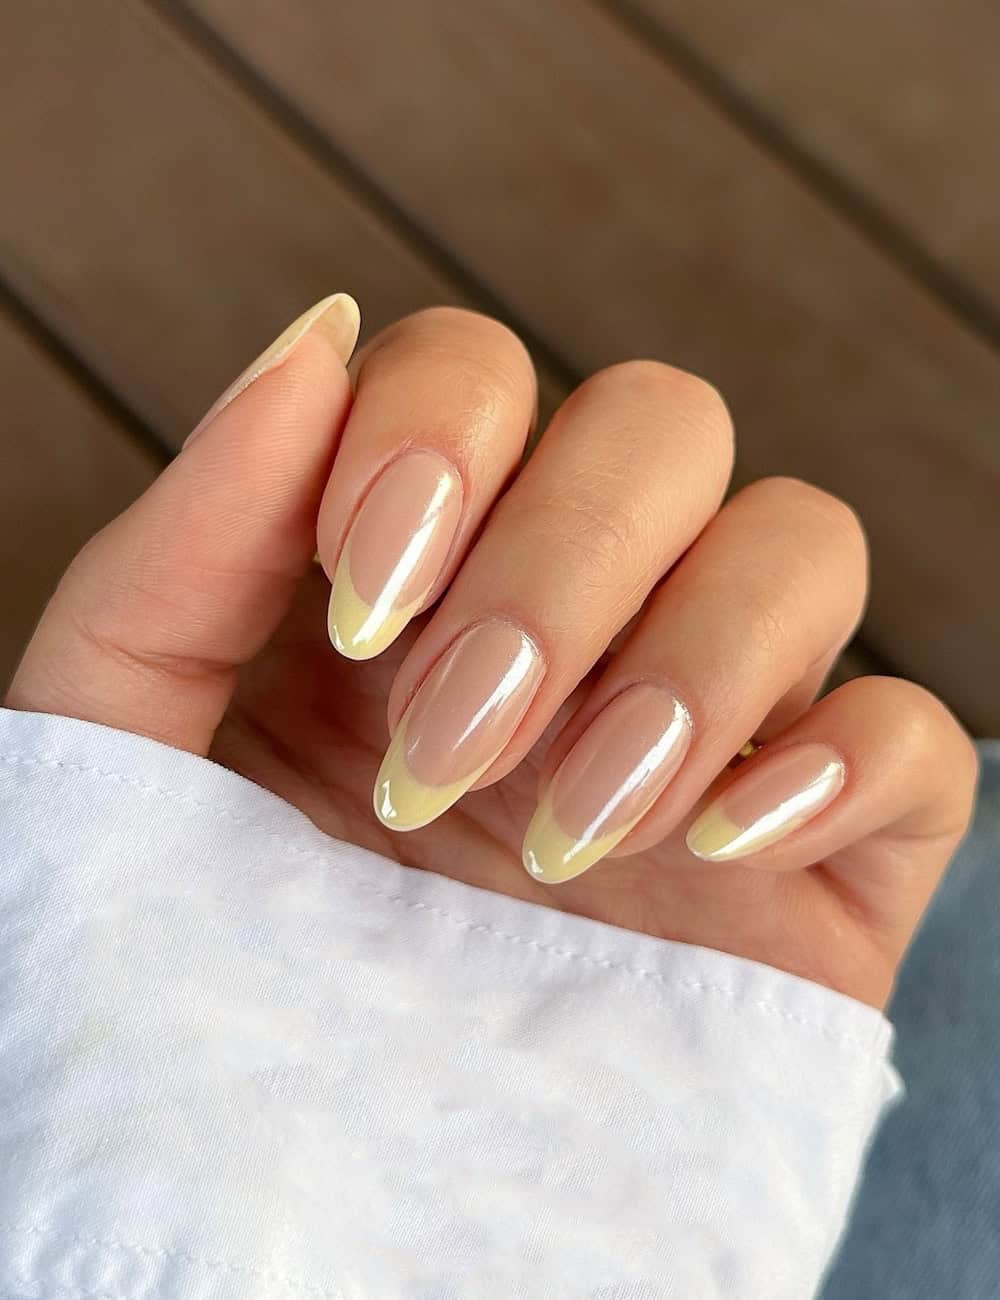 medium nude almond nails with butter yellow tips and a chrome finish